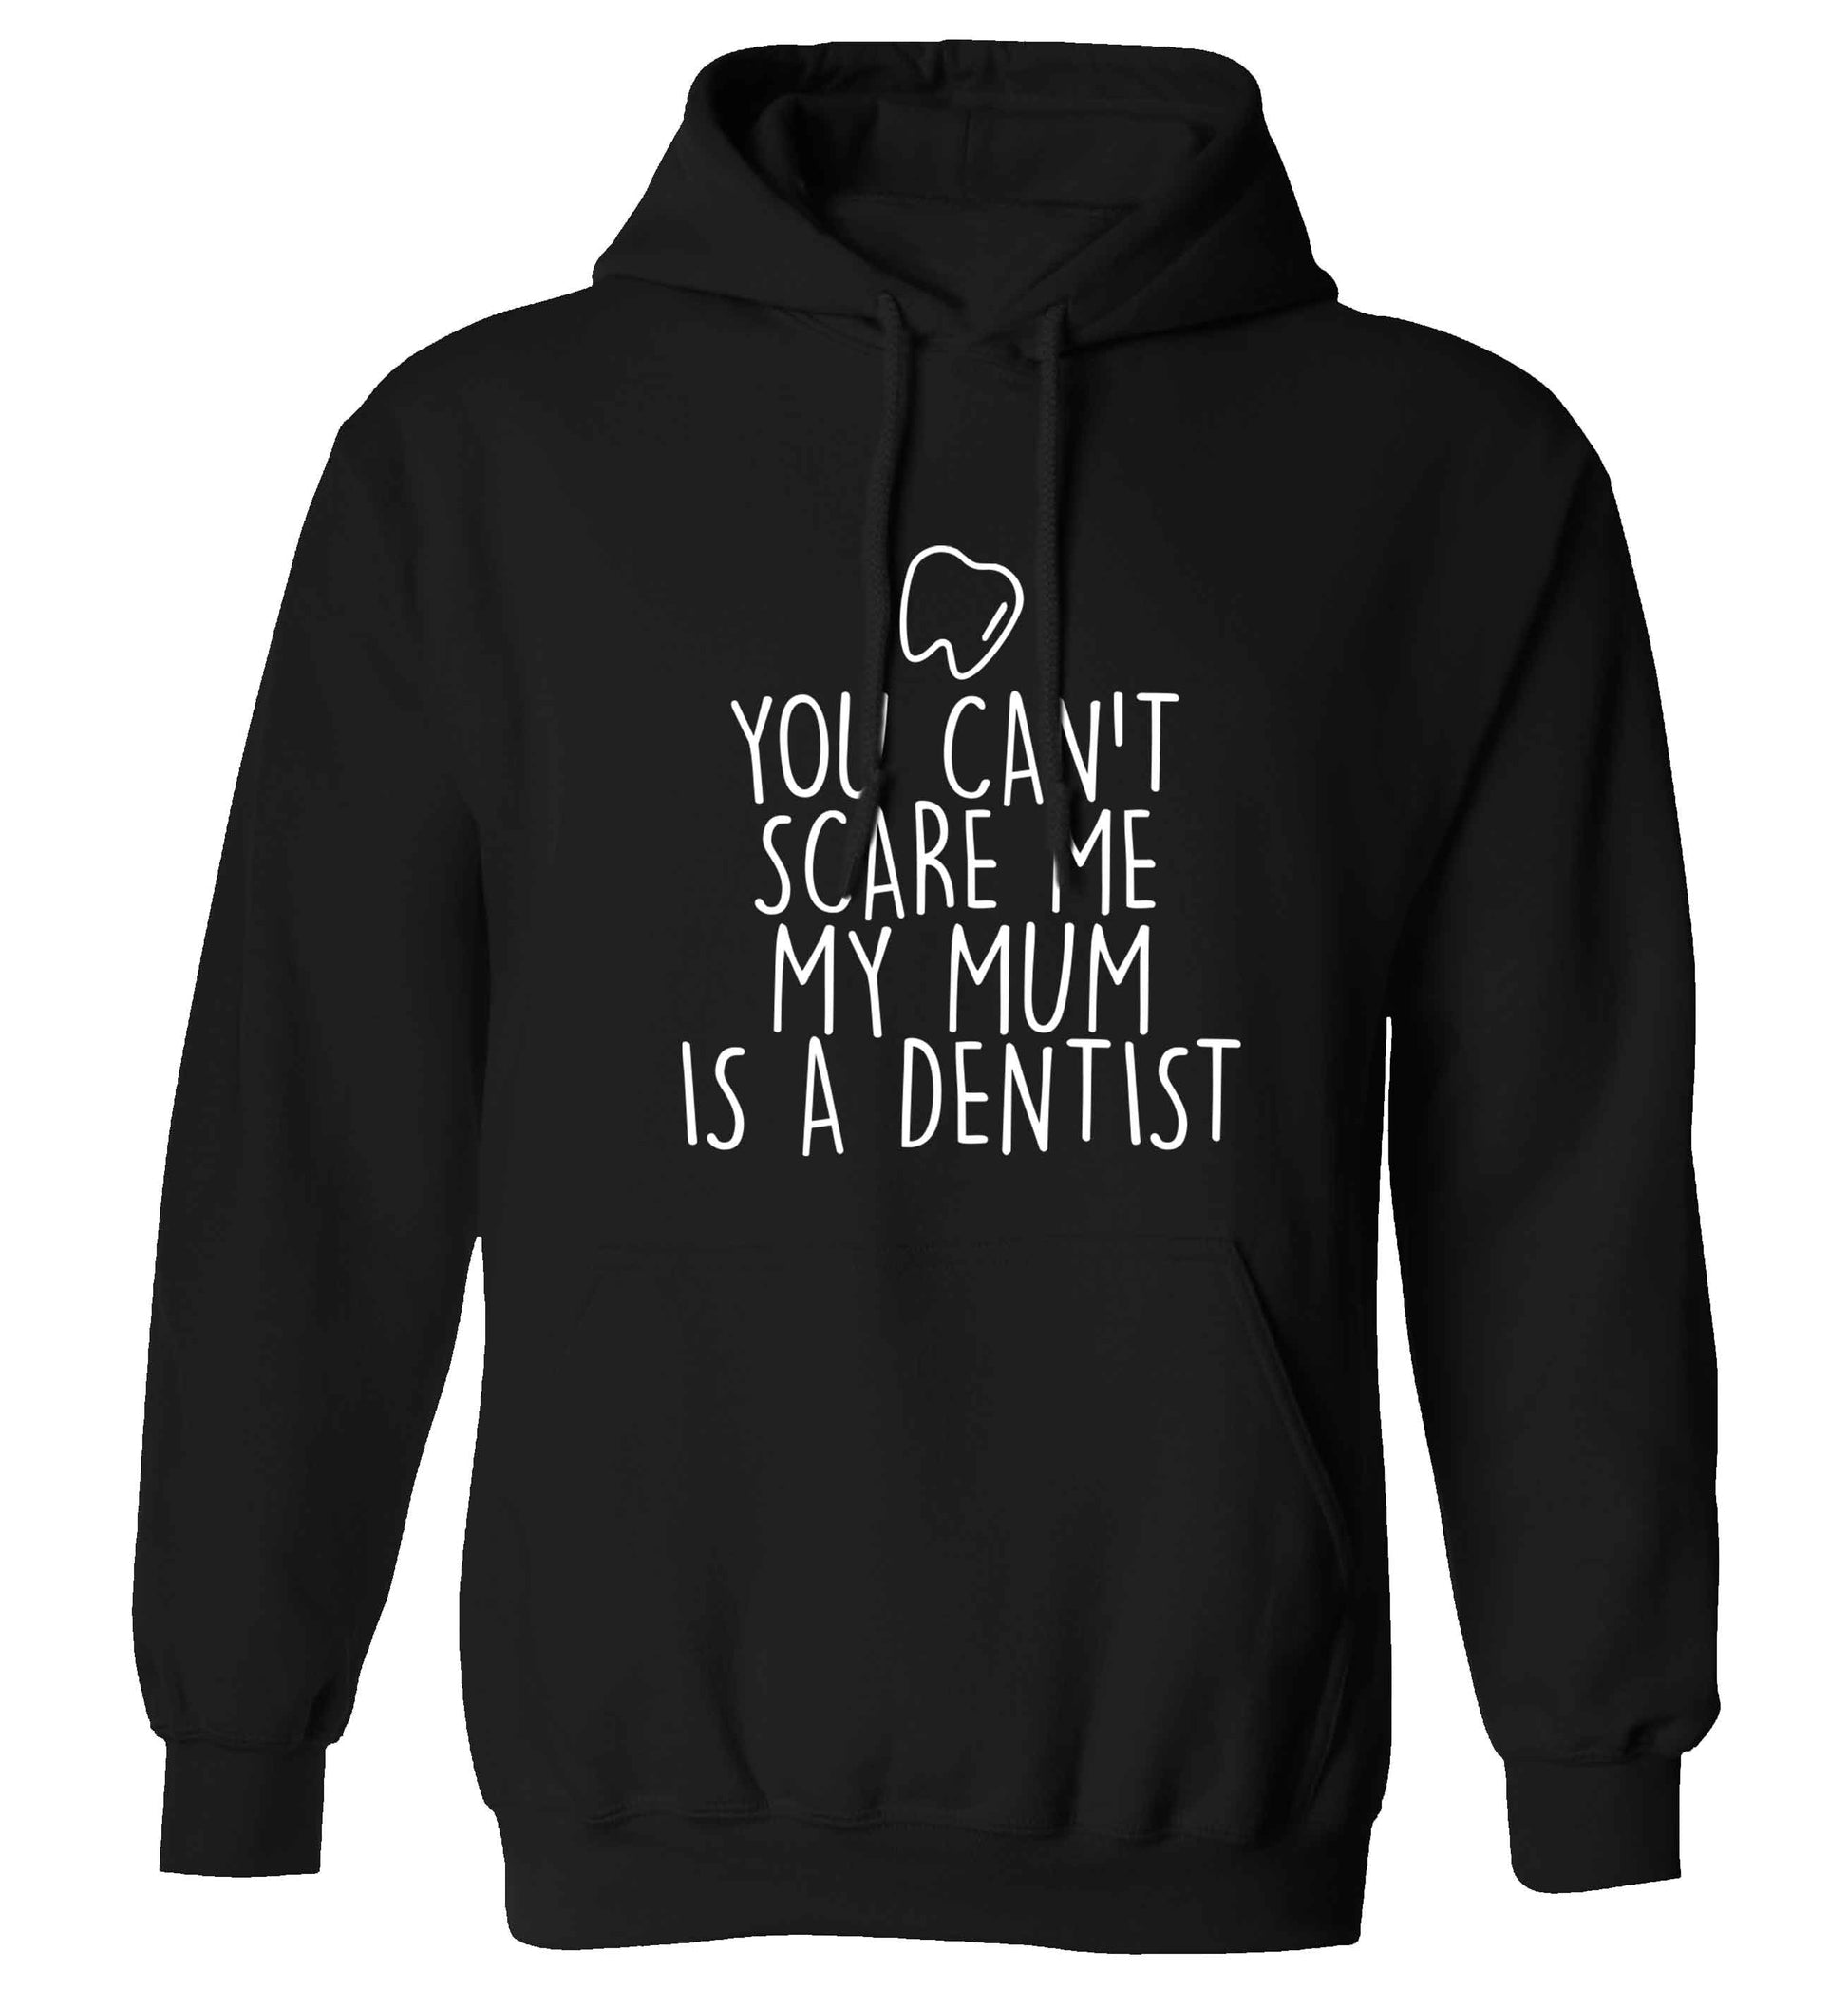 Minty Kisses Tooth Fairy (a) adults unisex black hoodie 2XL